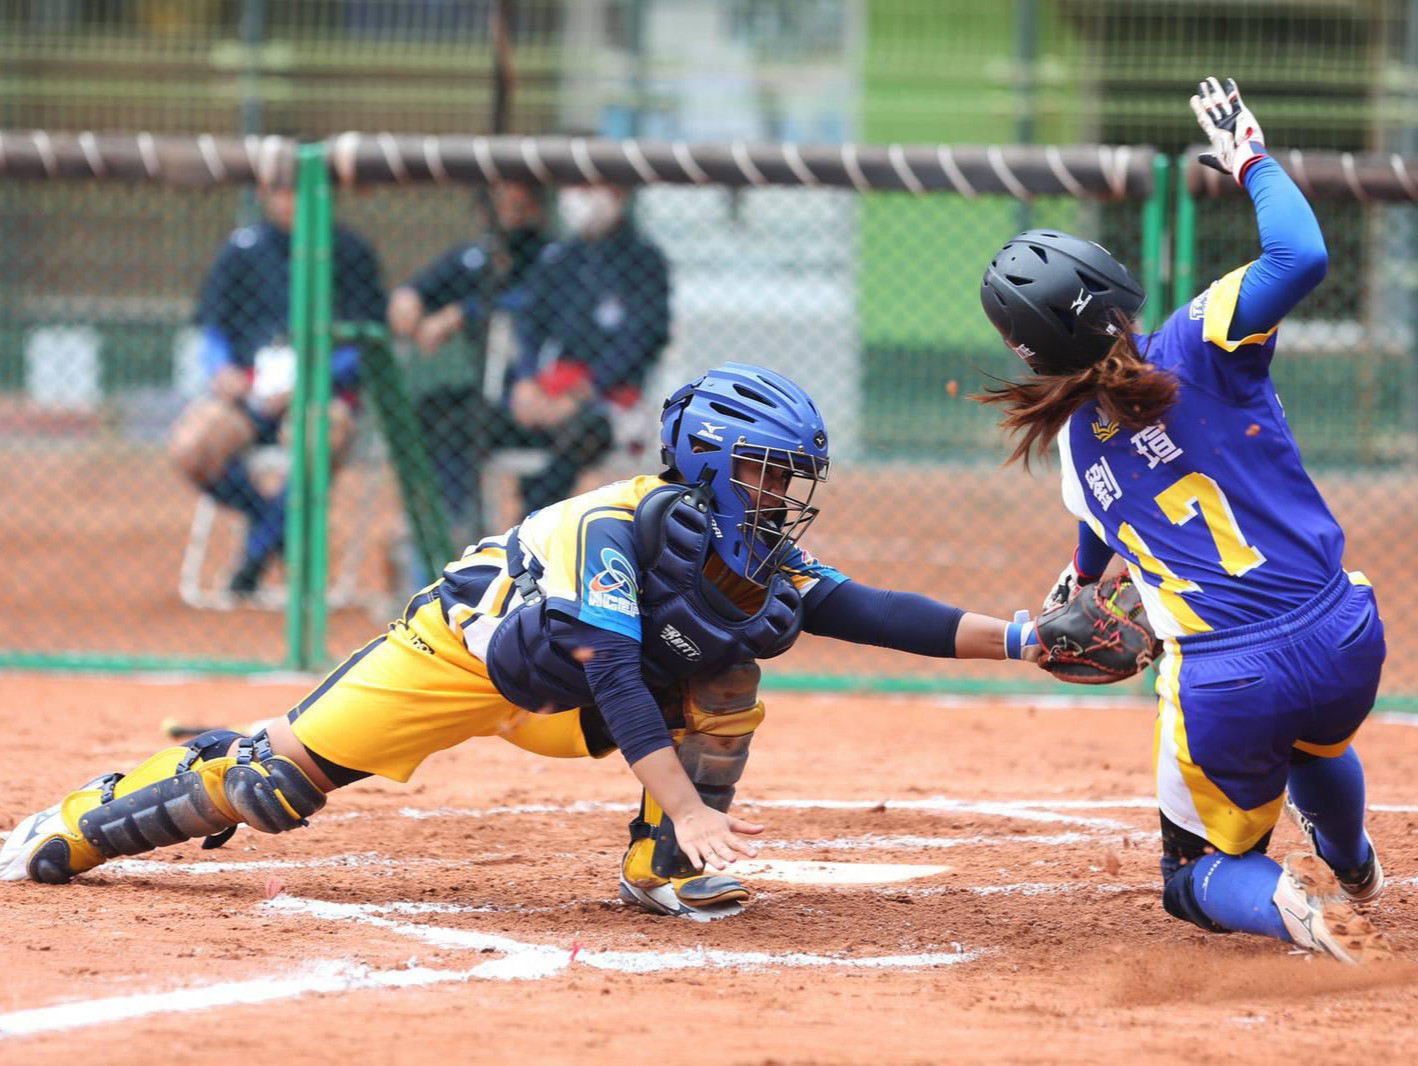 Taiwan becomes first country to open professional softball season